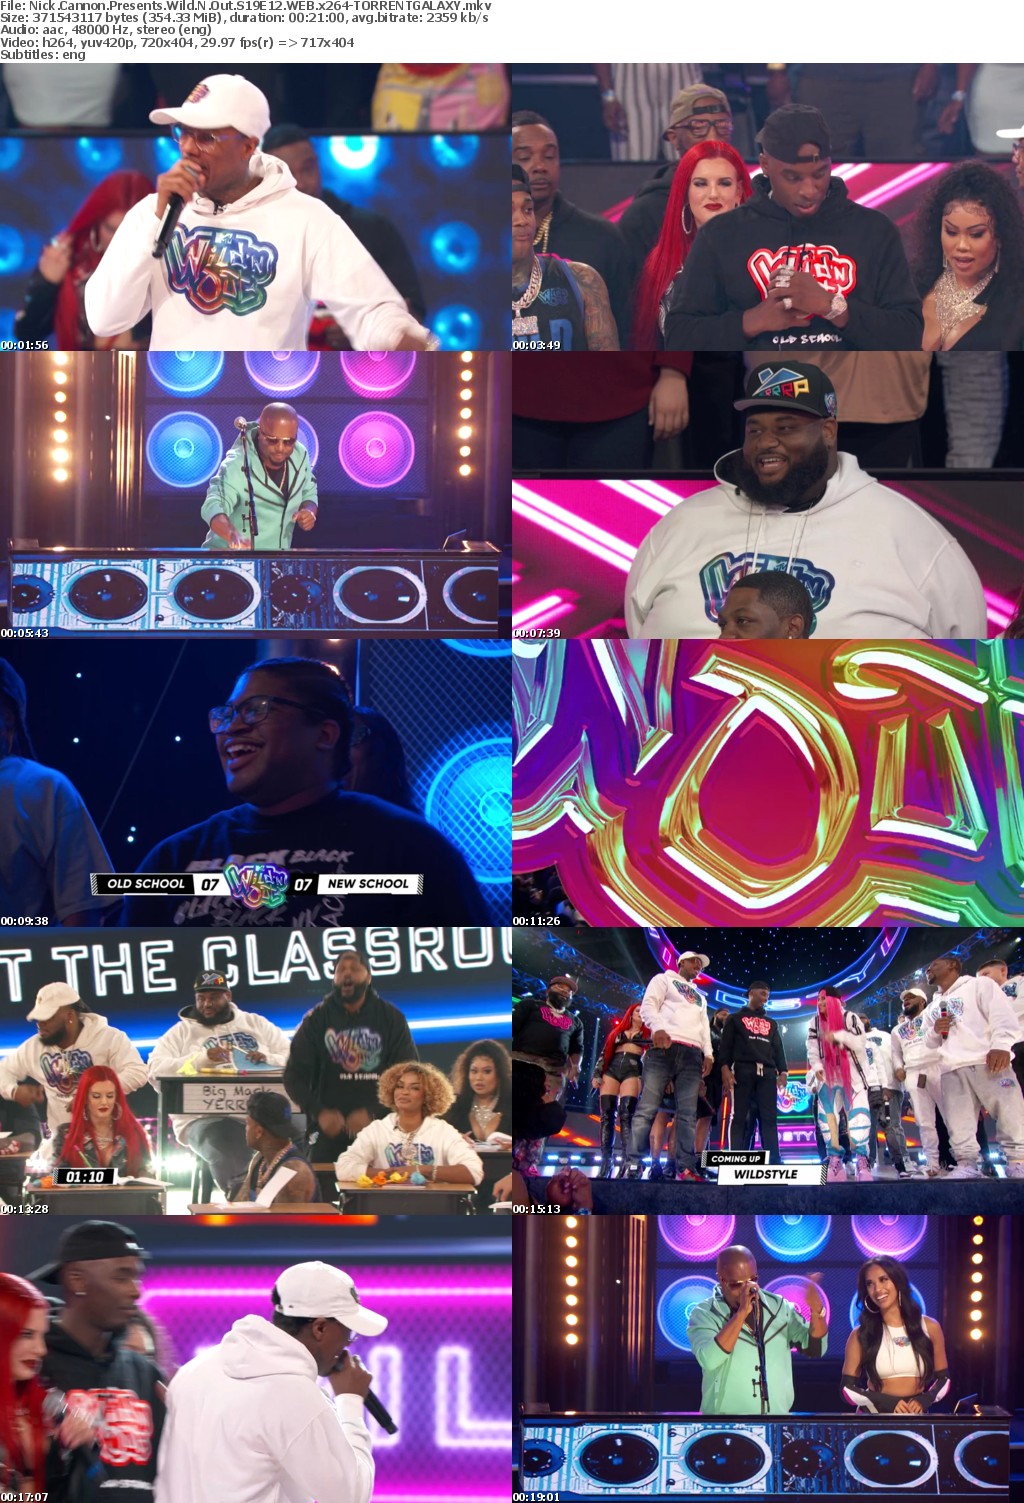 Nick Cannon Presents Wild N Out S19E12 WEB x264-GALAXY